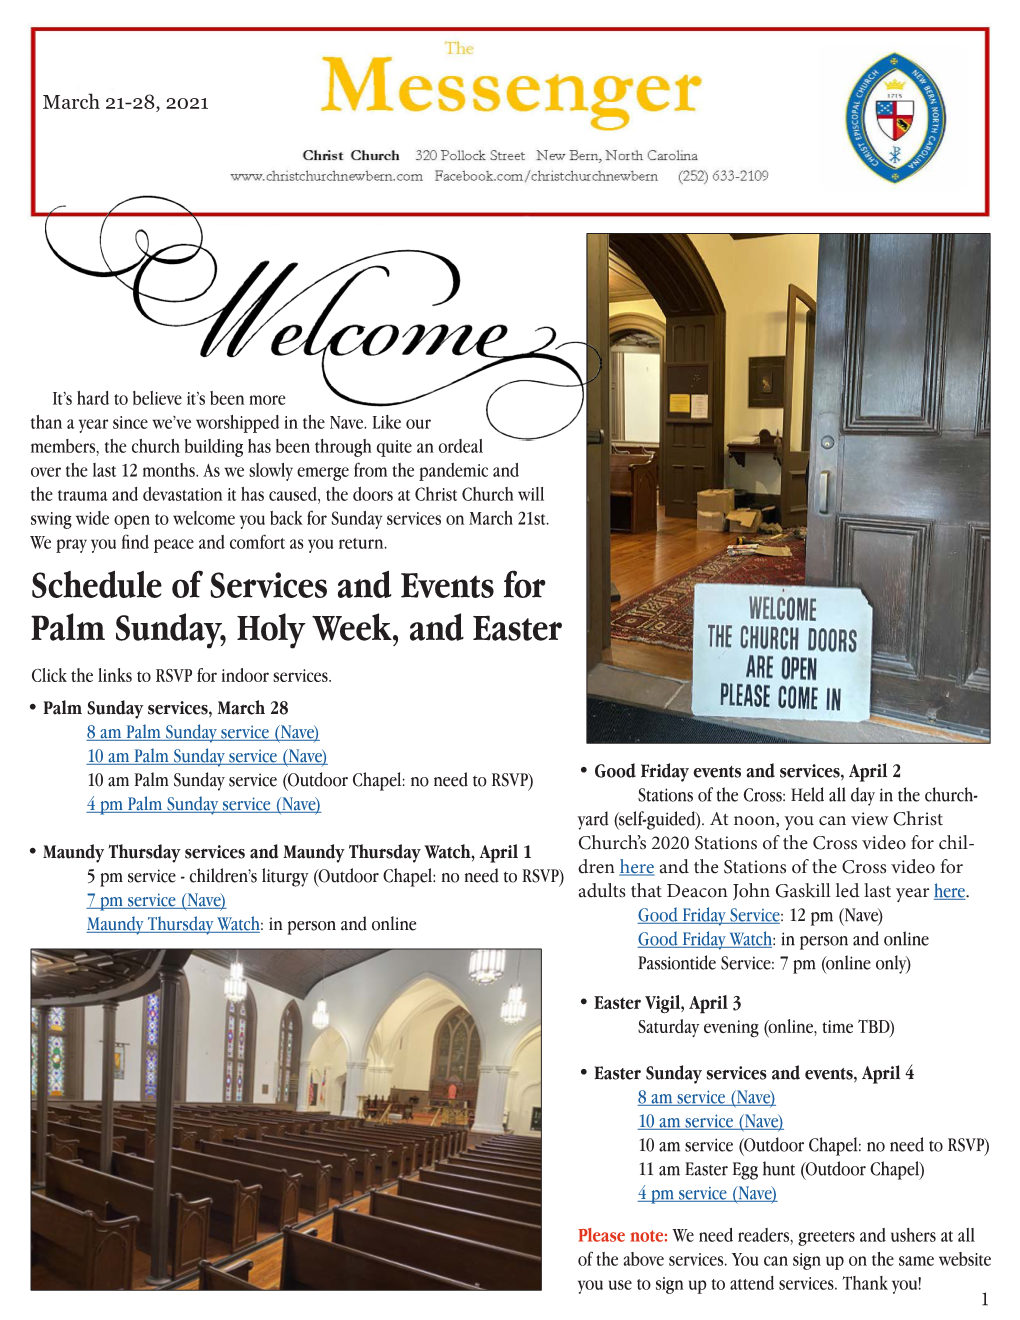 Schedule of Services and Events for Palm Sunday, Holy Week, and Easter Click the Links to RSVP for Indoor Services